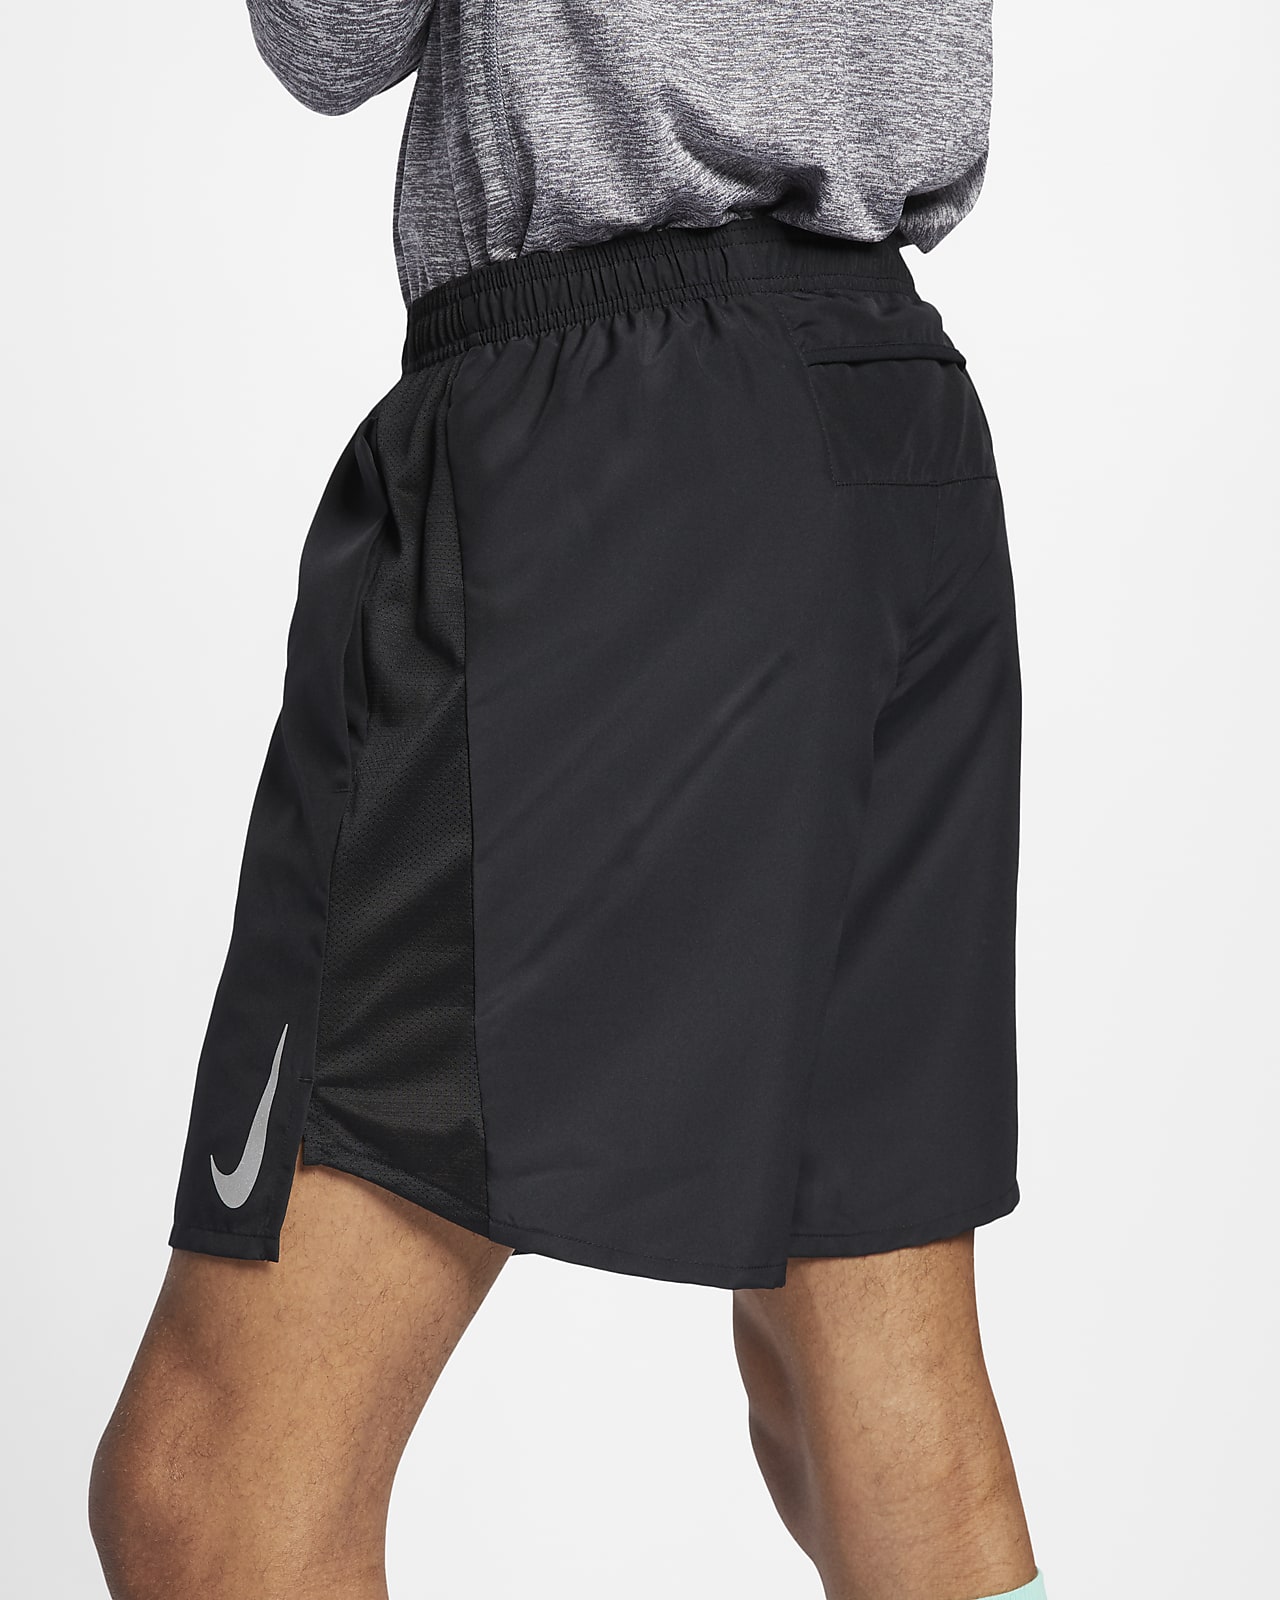 nike challenger shorts 2 in 1